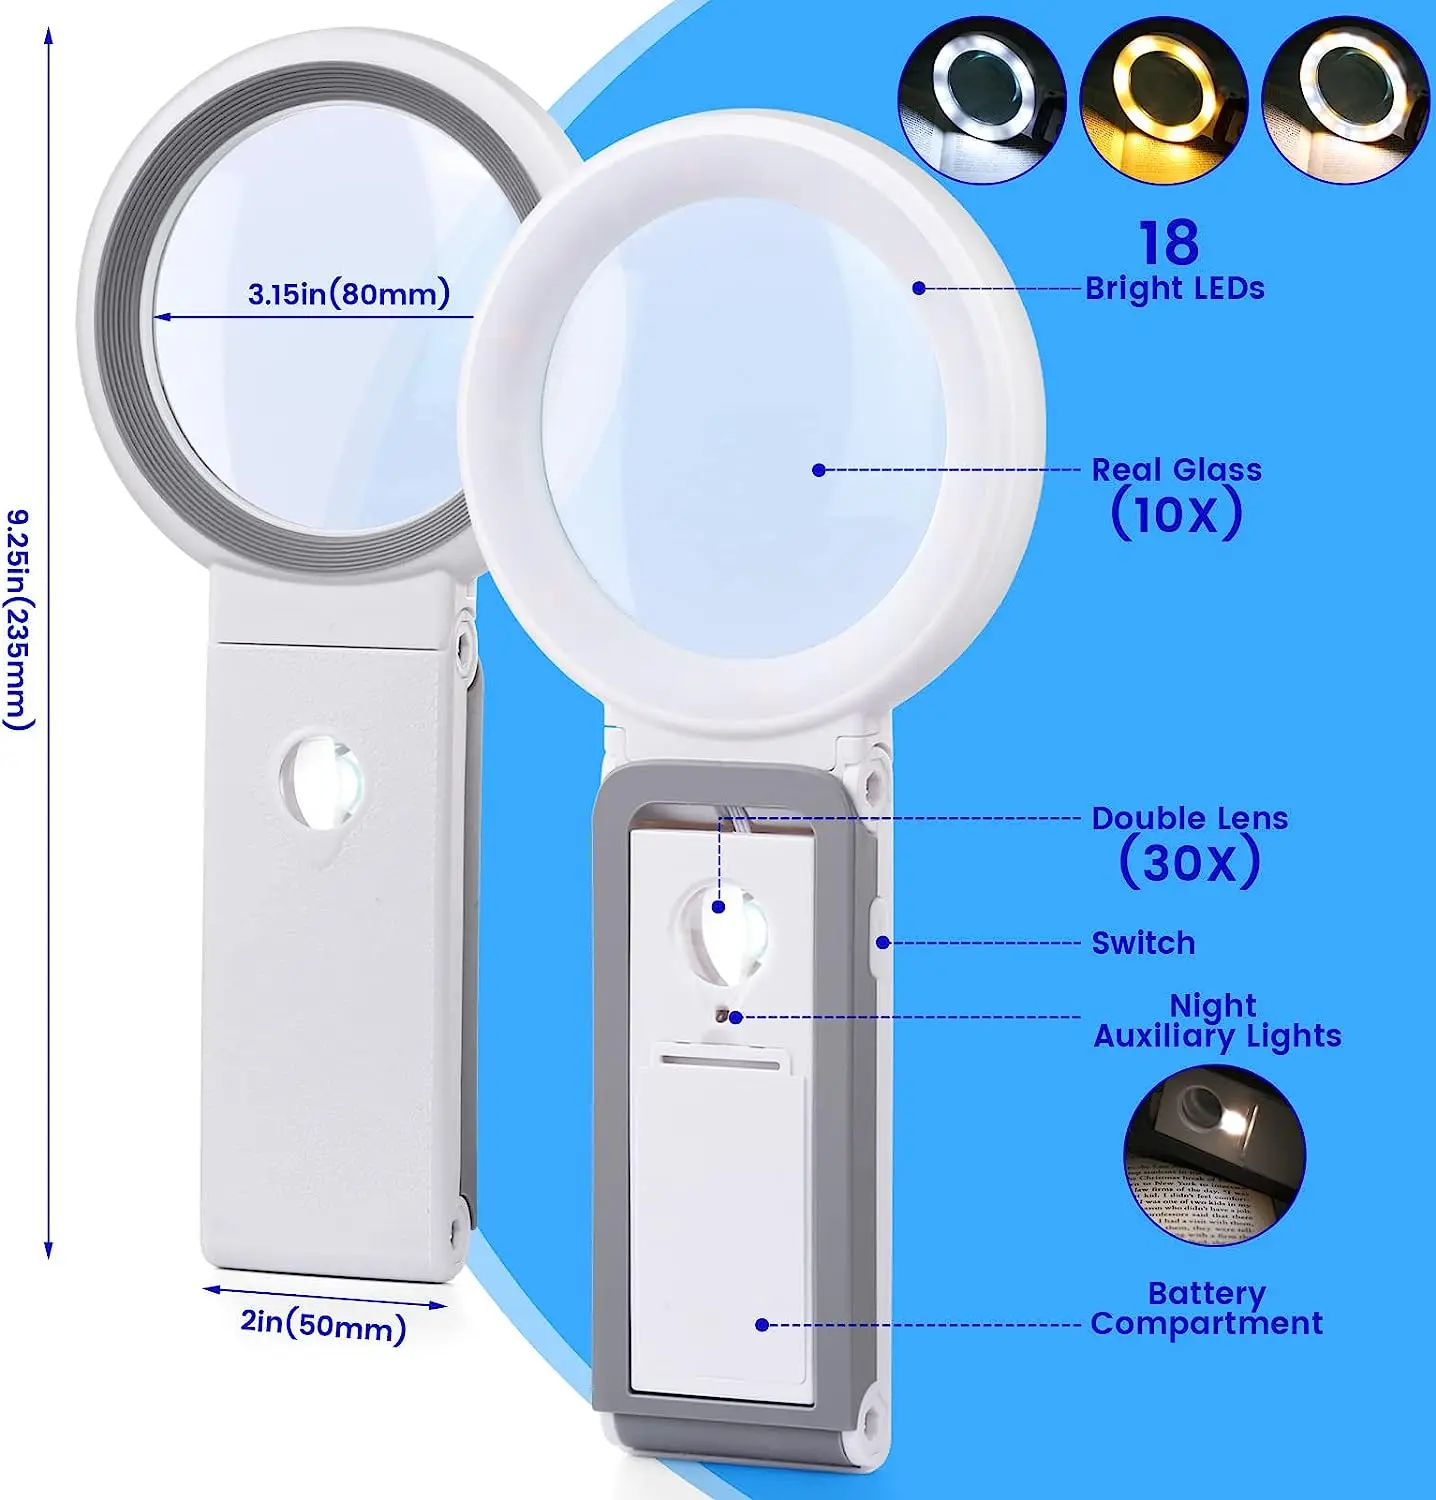 Magnifying glass with LED lights - Handheld light